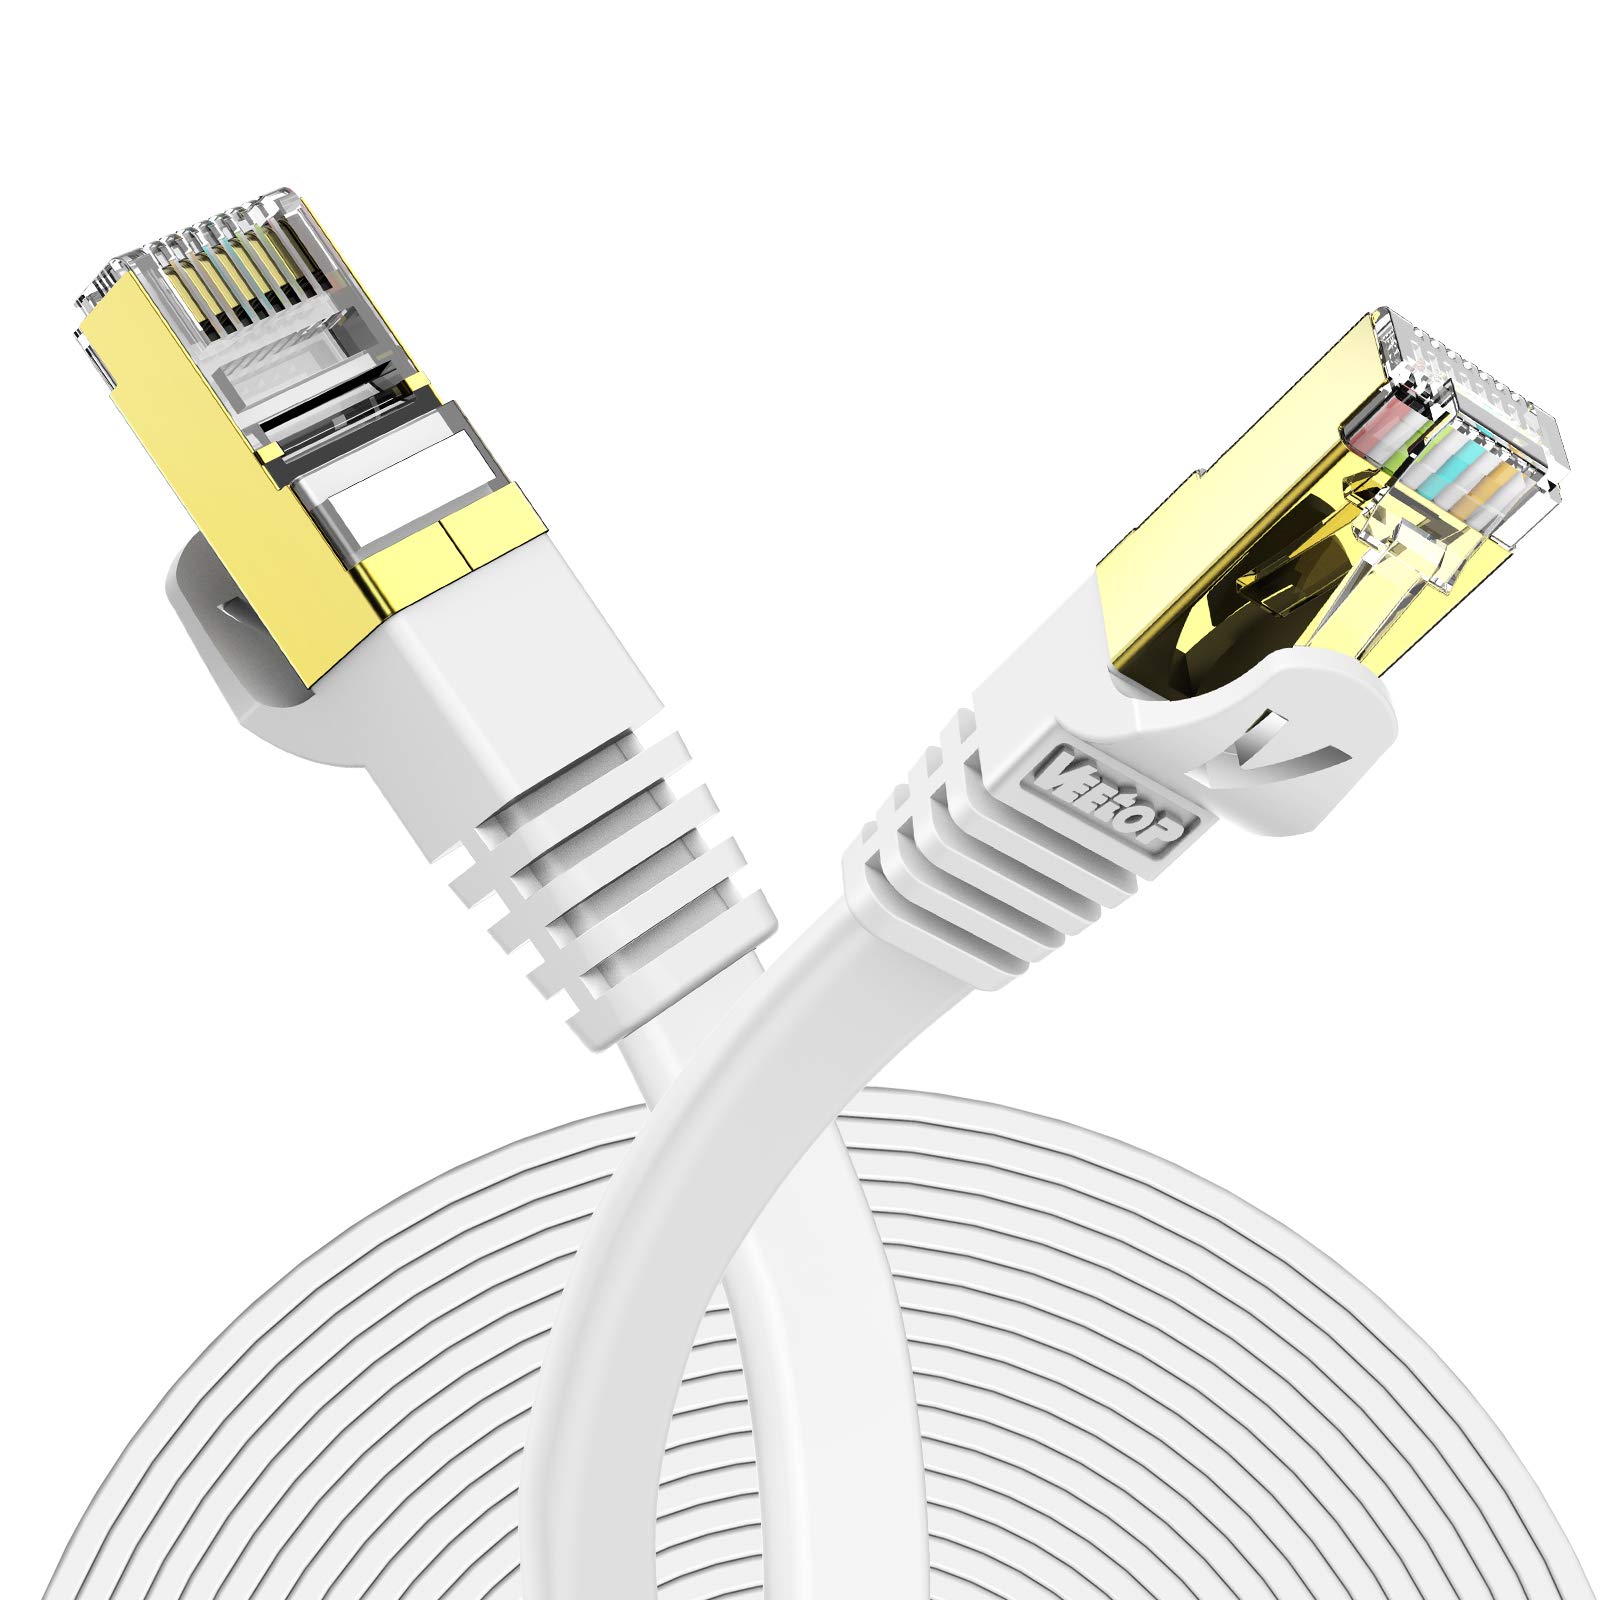 Ethernet cables and devices